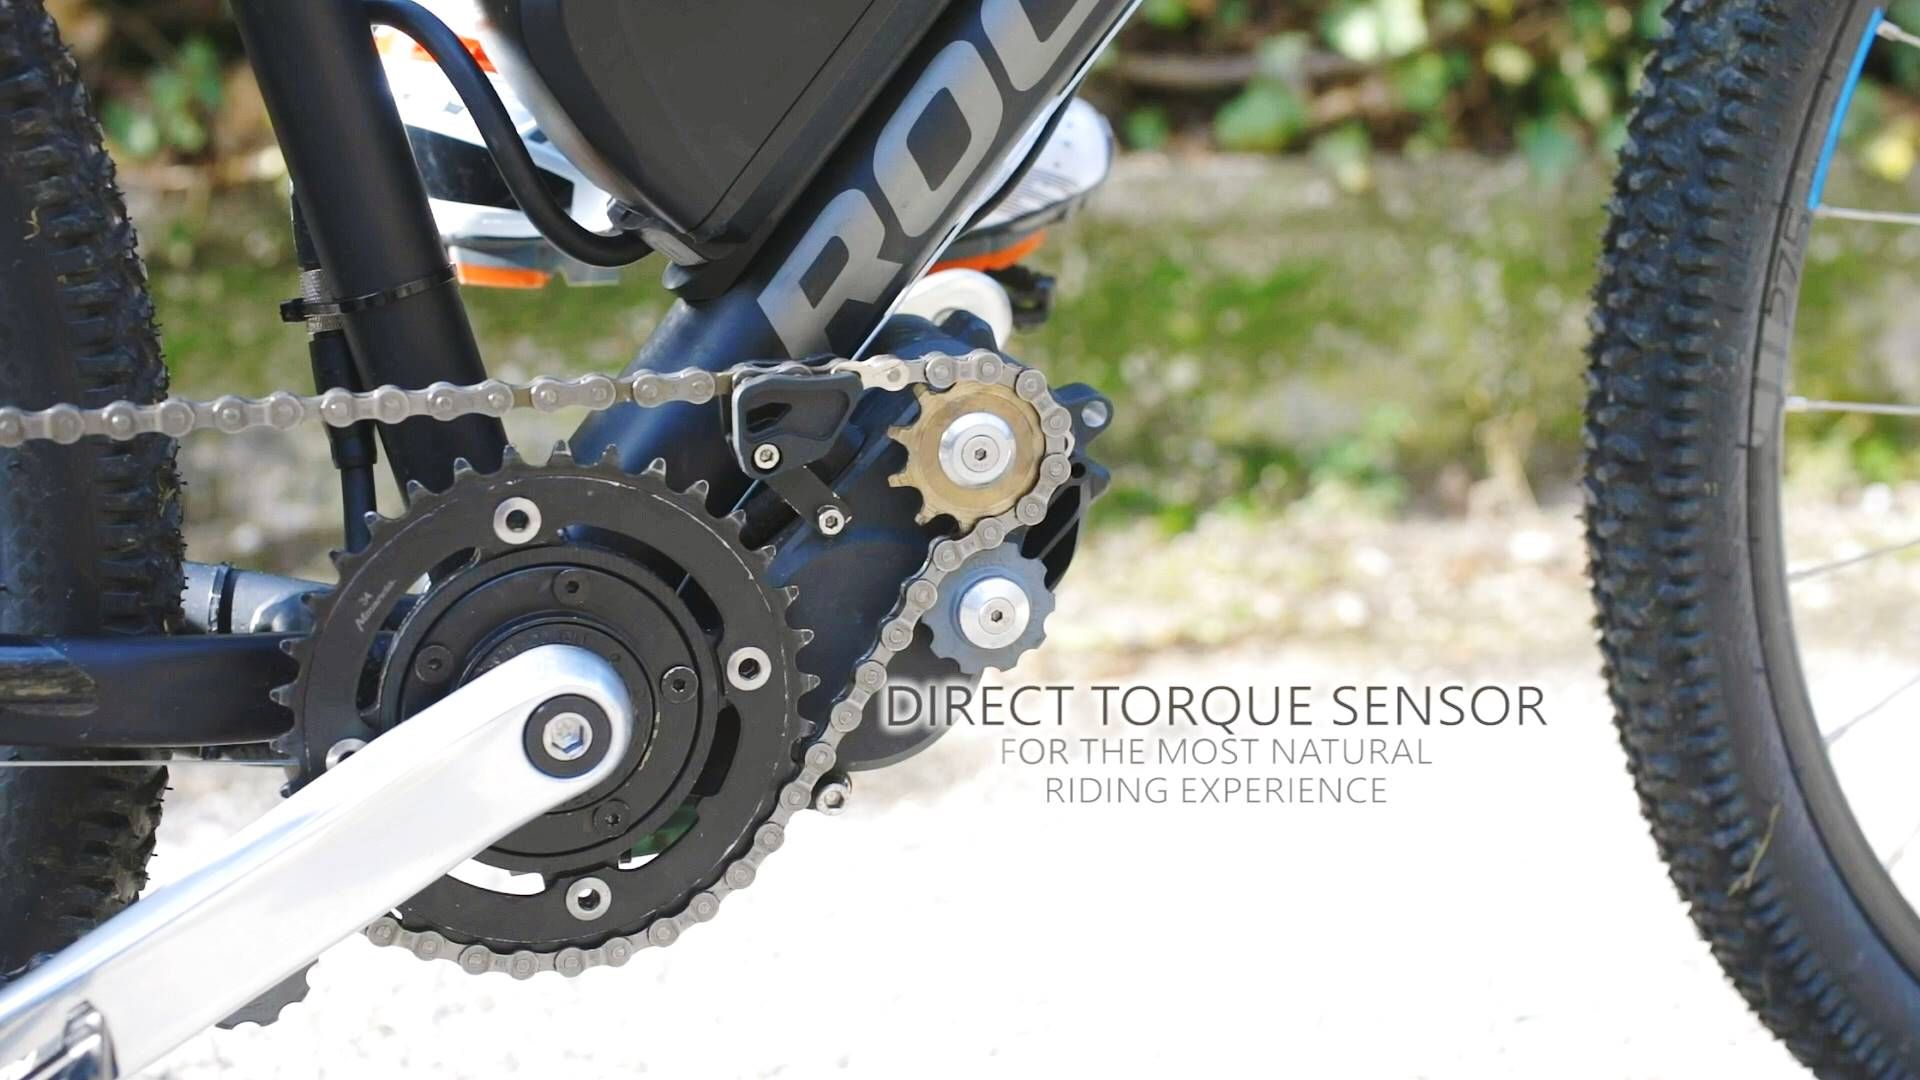 New 'Lightest' mid-drive electric bike conversion kit offers up to 1